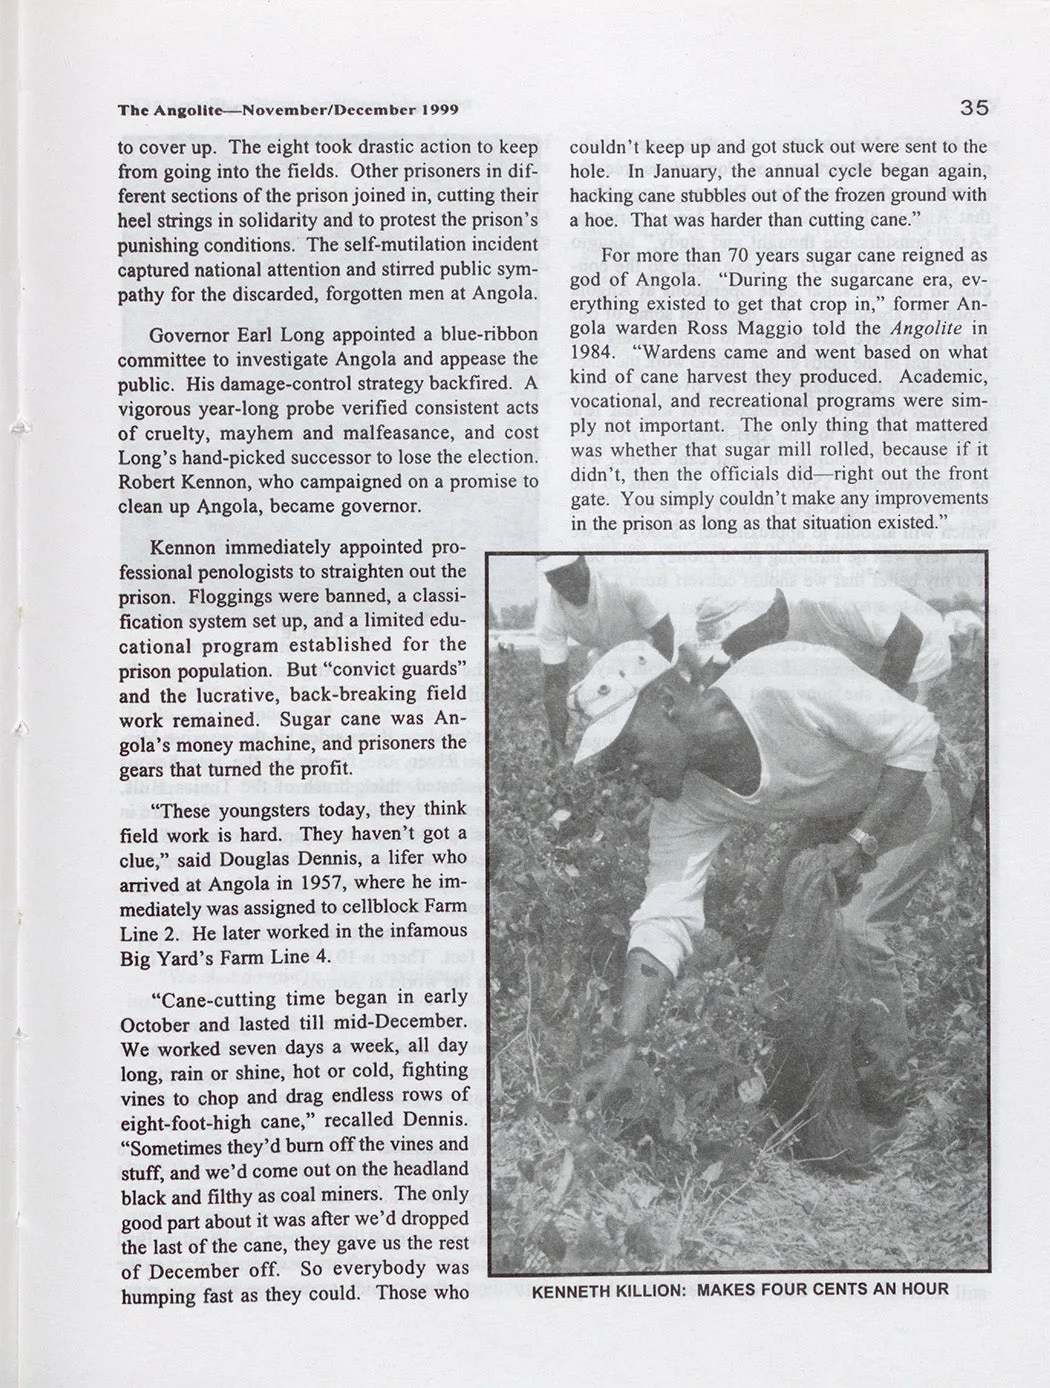 A page of The Angolite that features a photograph of an inmate, Kenneth Killion, picking sugar cane in a field.